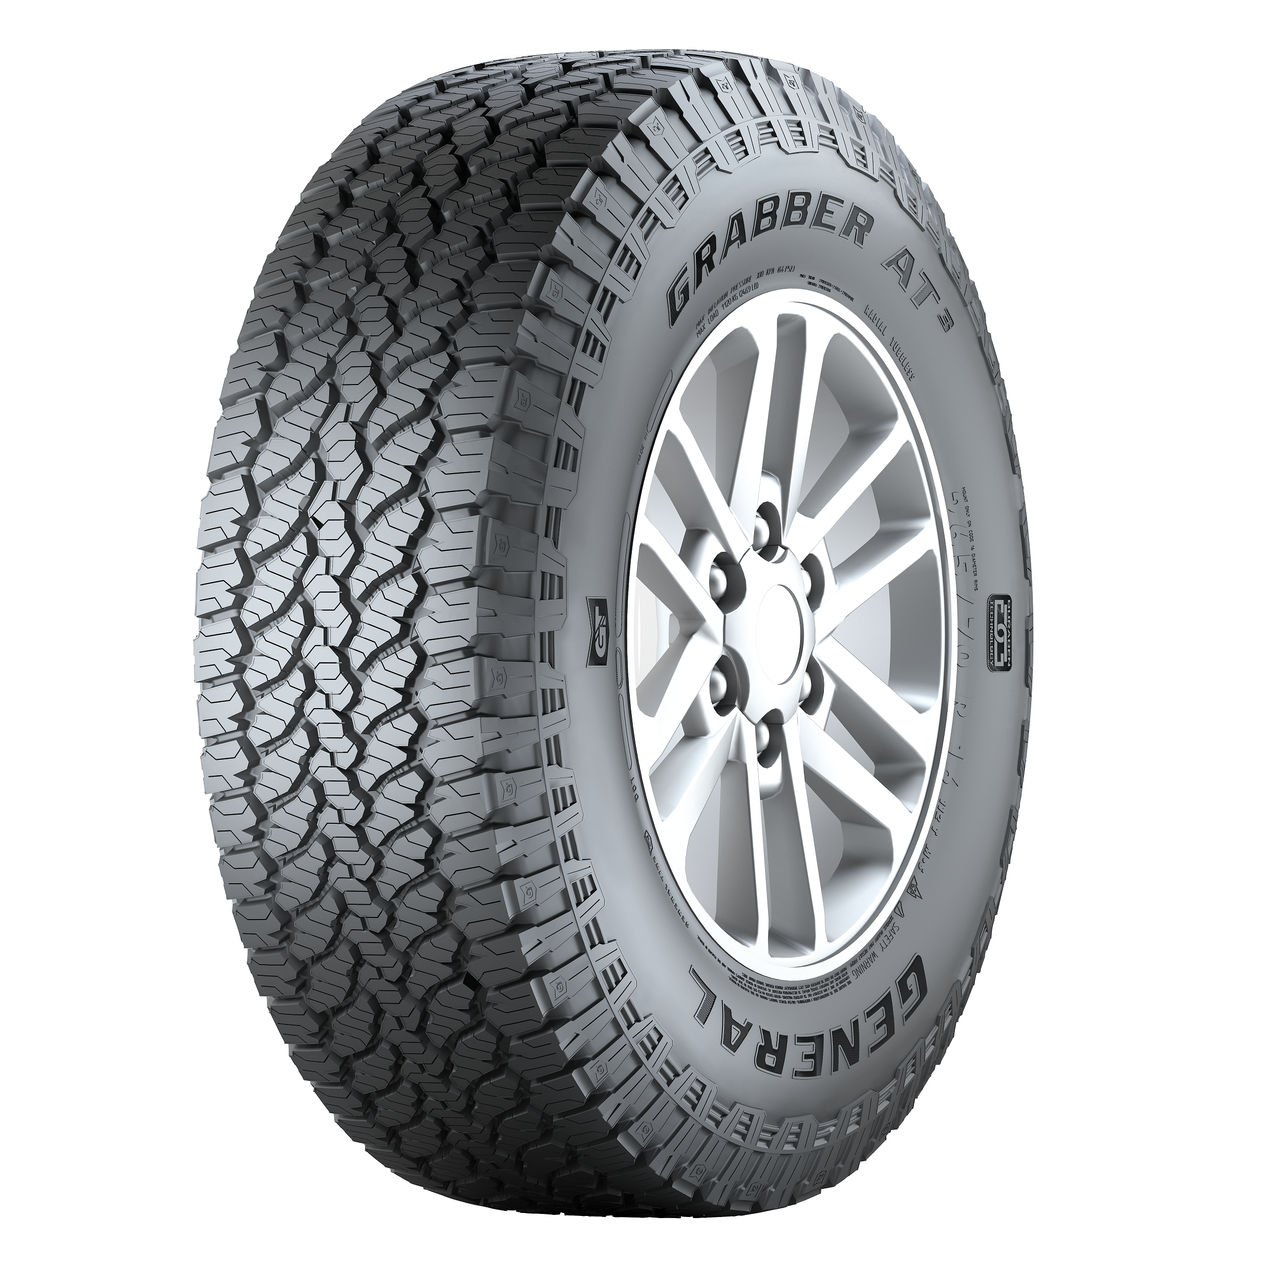 General Tire Announces Voluntary Exchange Programme for 612 Passenger Vehicle Tyres in the UK